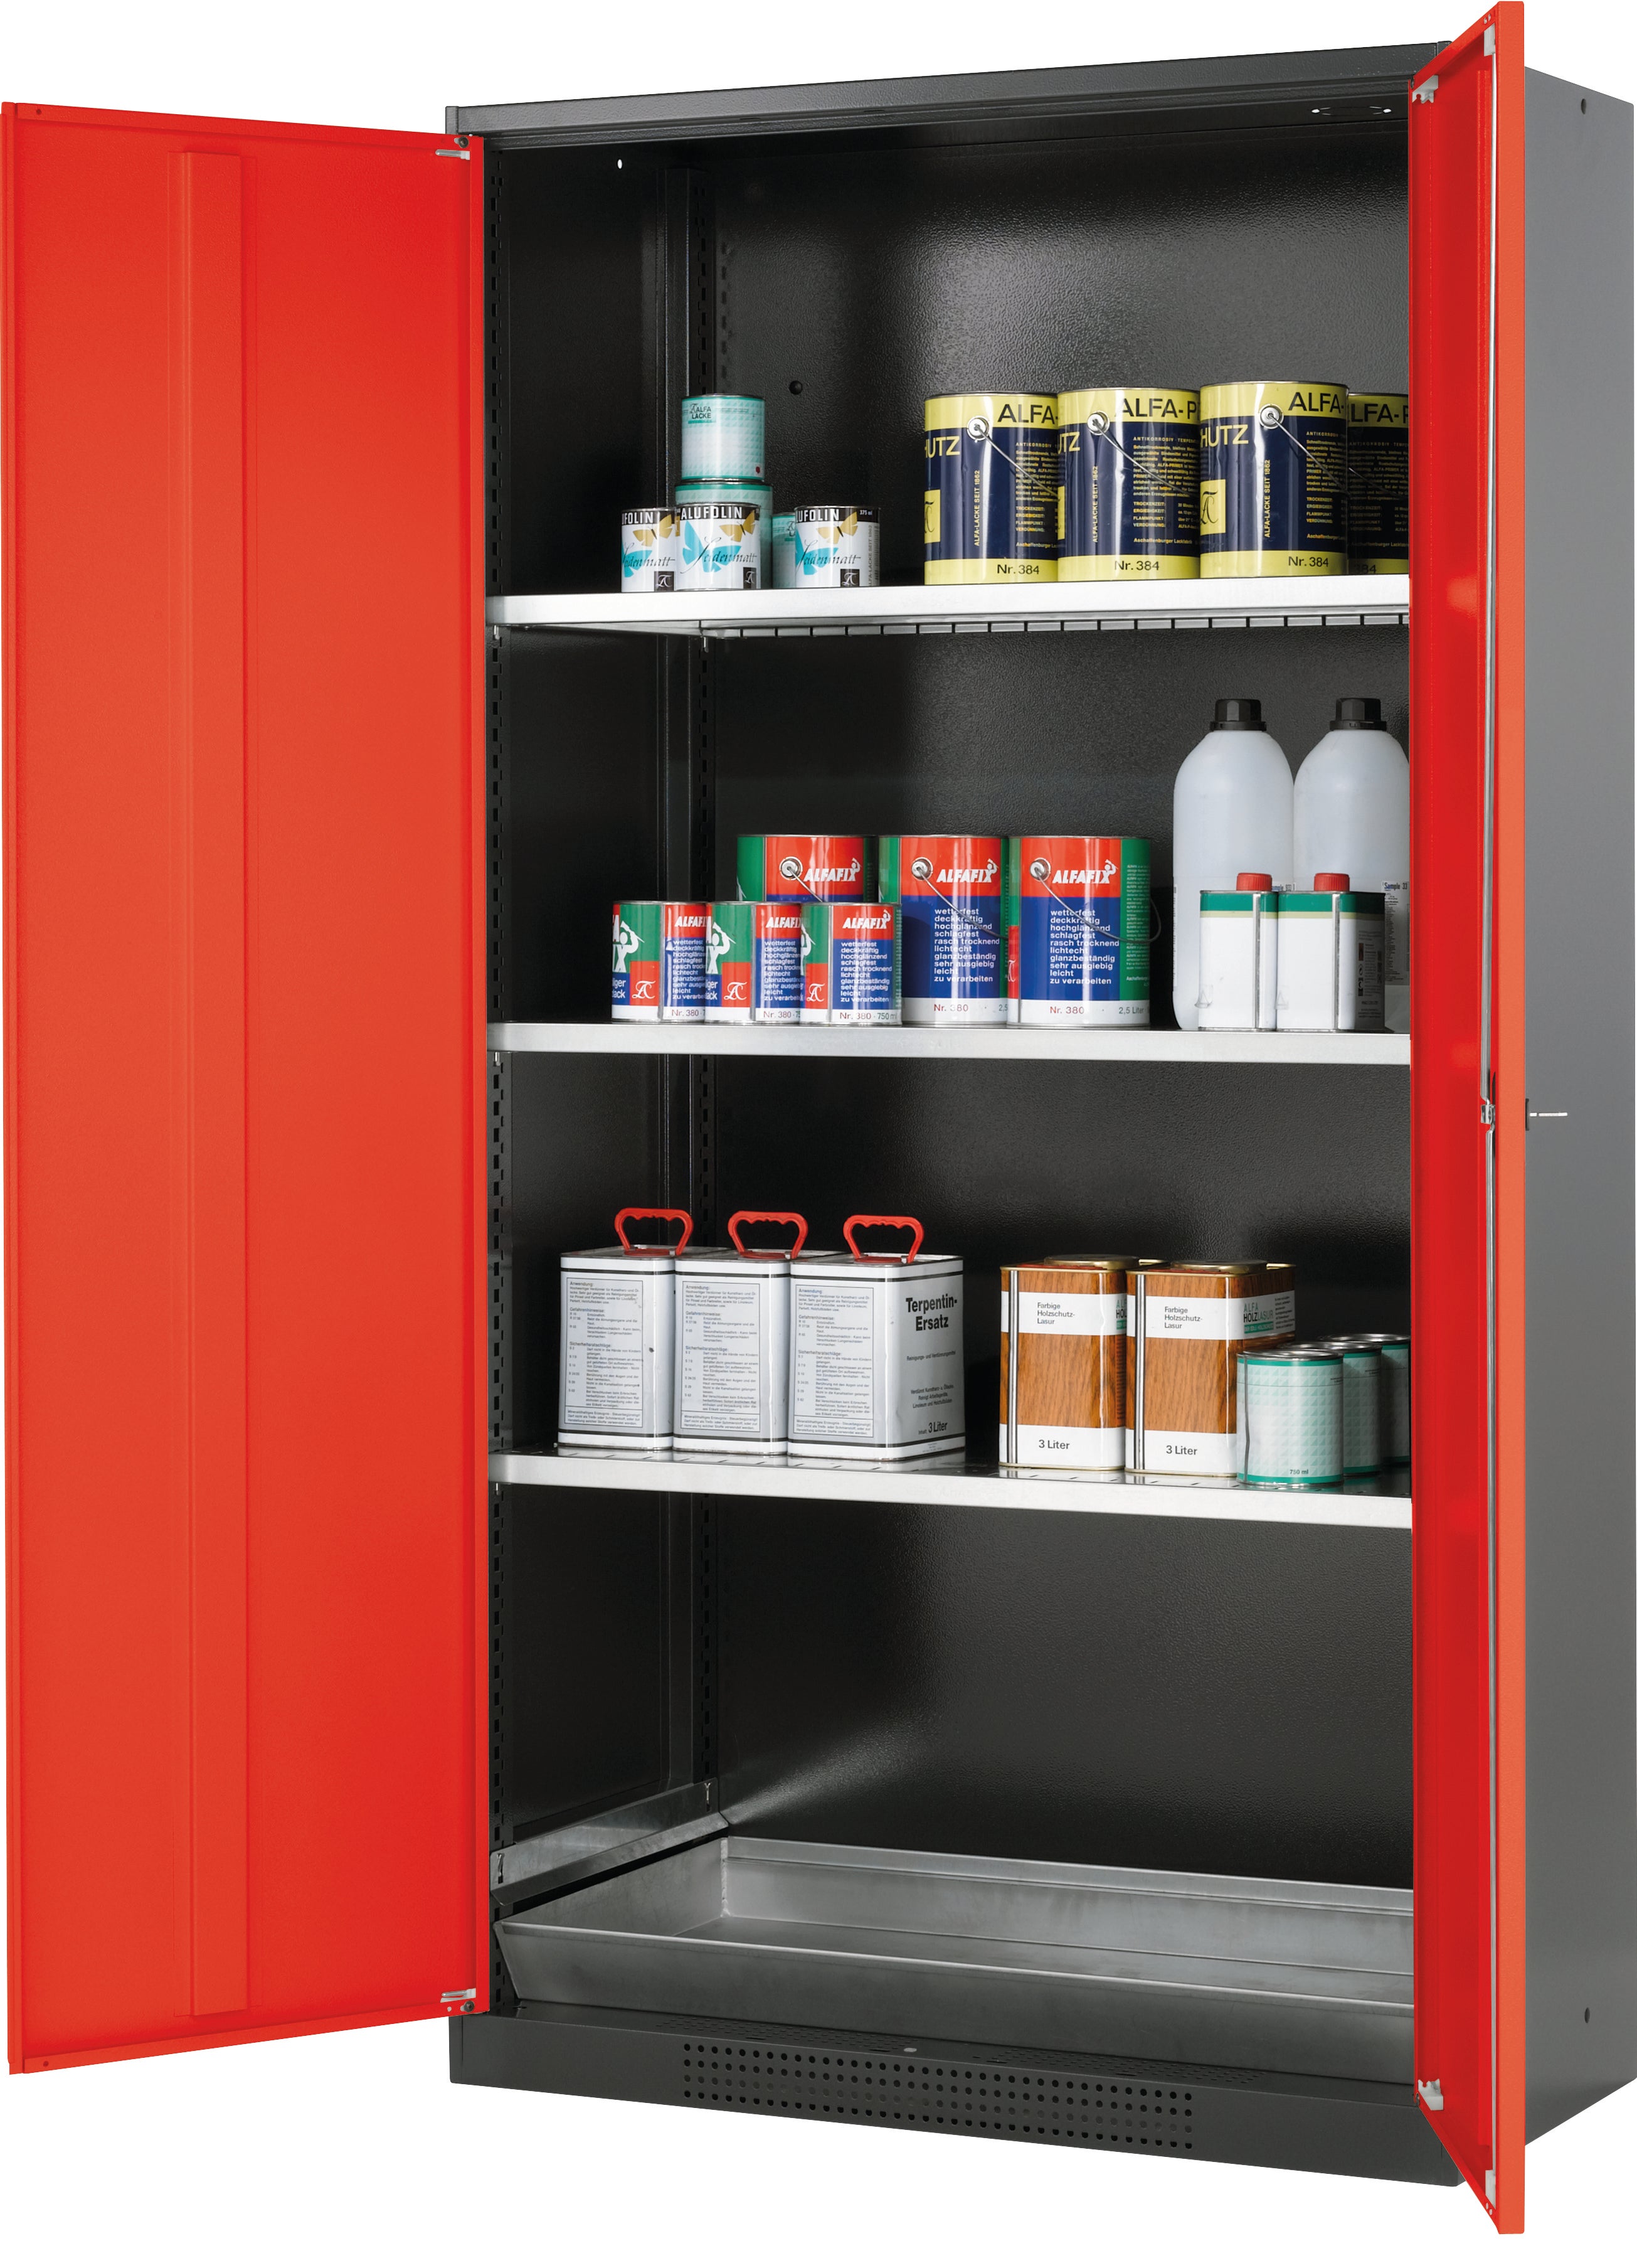 Chemical cabinet CS-CLASSIC model CS.195.105 in traffic red RAL 3020 with 3x standard shelves (sheet steel)